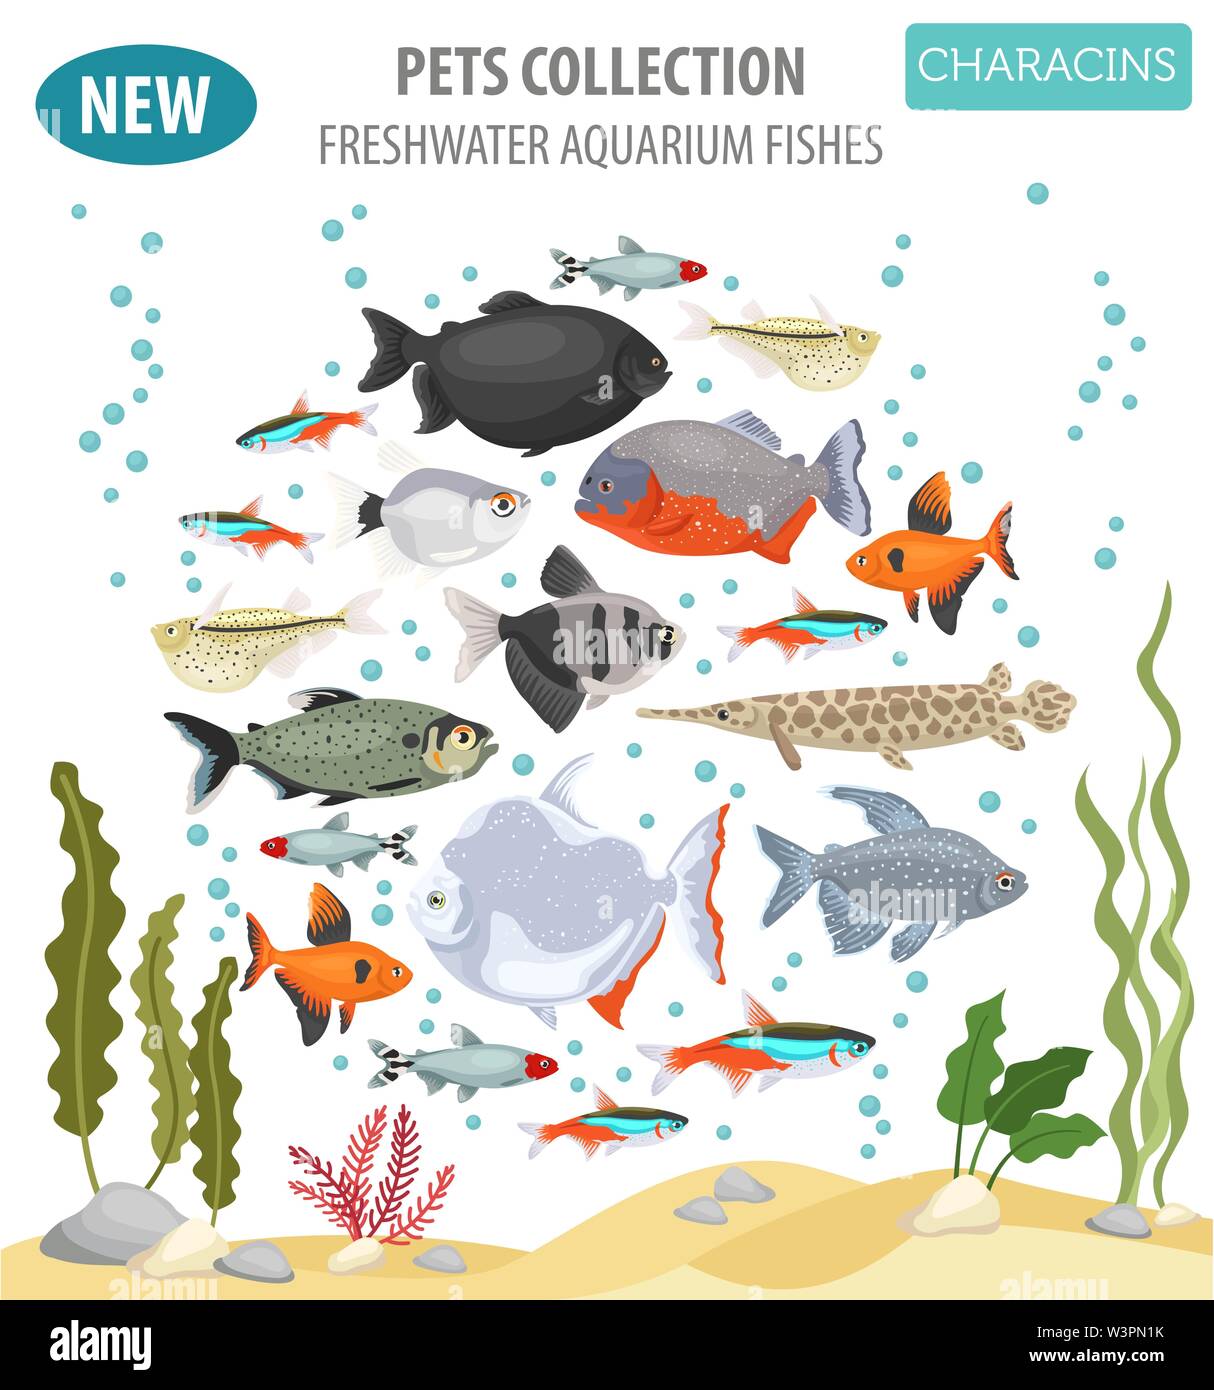 Freshwater aquarium fishes breeds icon set flat style isolated on white. Characins. Create own infographic about pets. Vector illustration Stock Vector